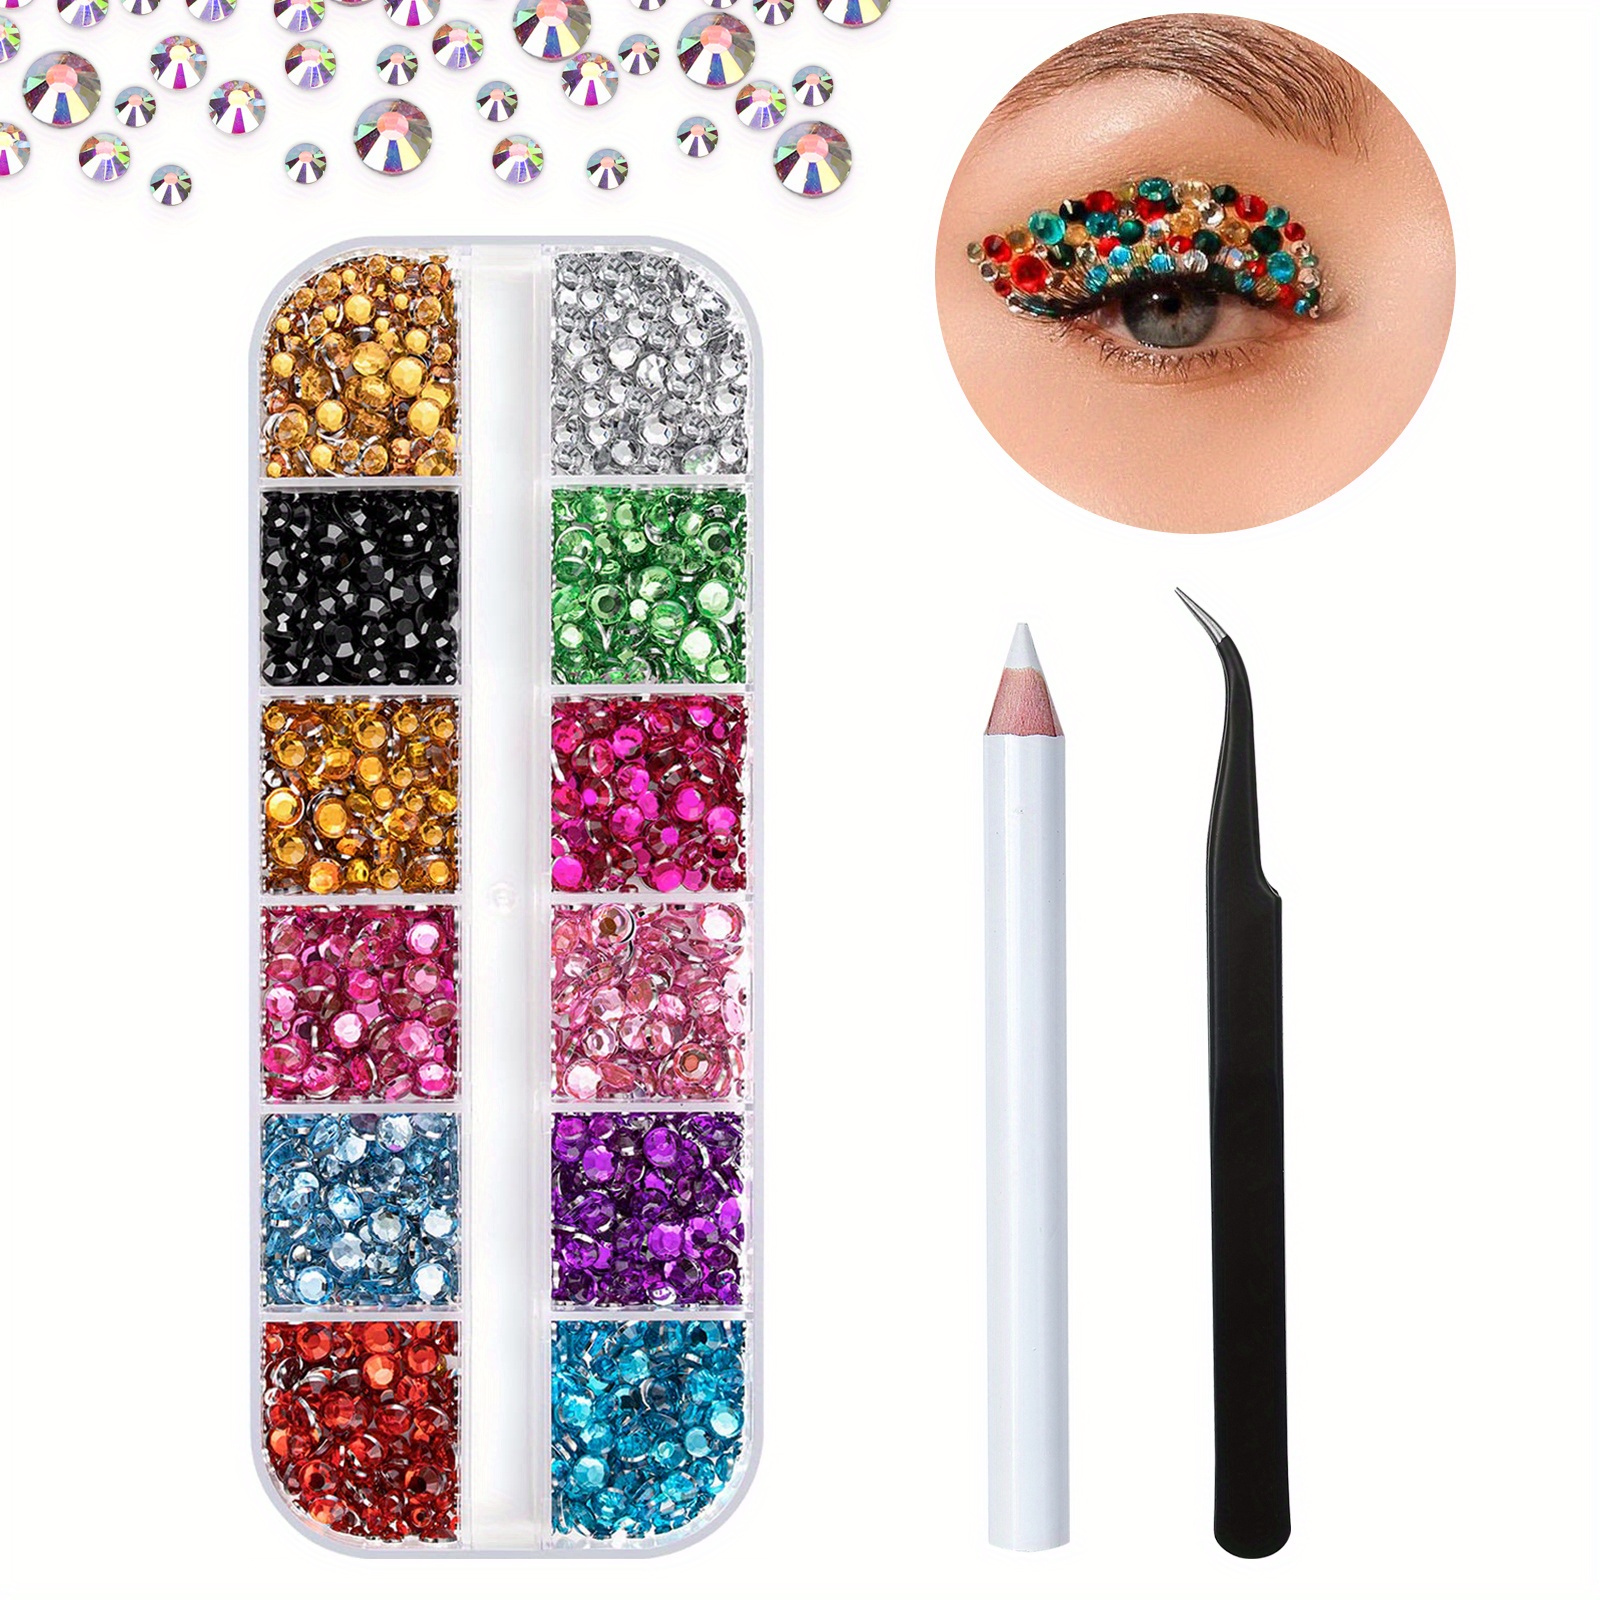 Ab Clear Rhinestones Nail Gems - 6 Sizes - Mixed - Includes Storage  Organizer Box - Perfect For Nail Art And Diy Projects - Temu Portugal